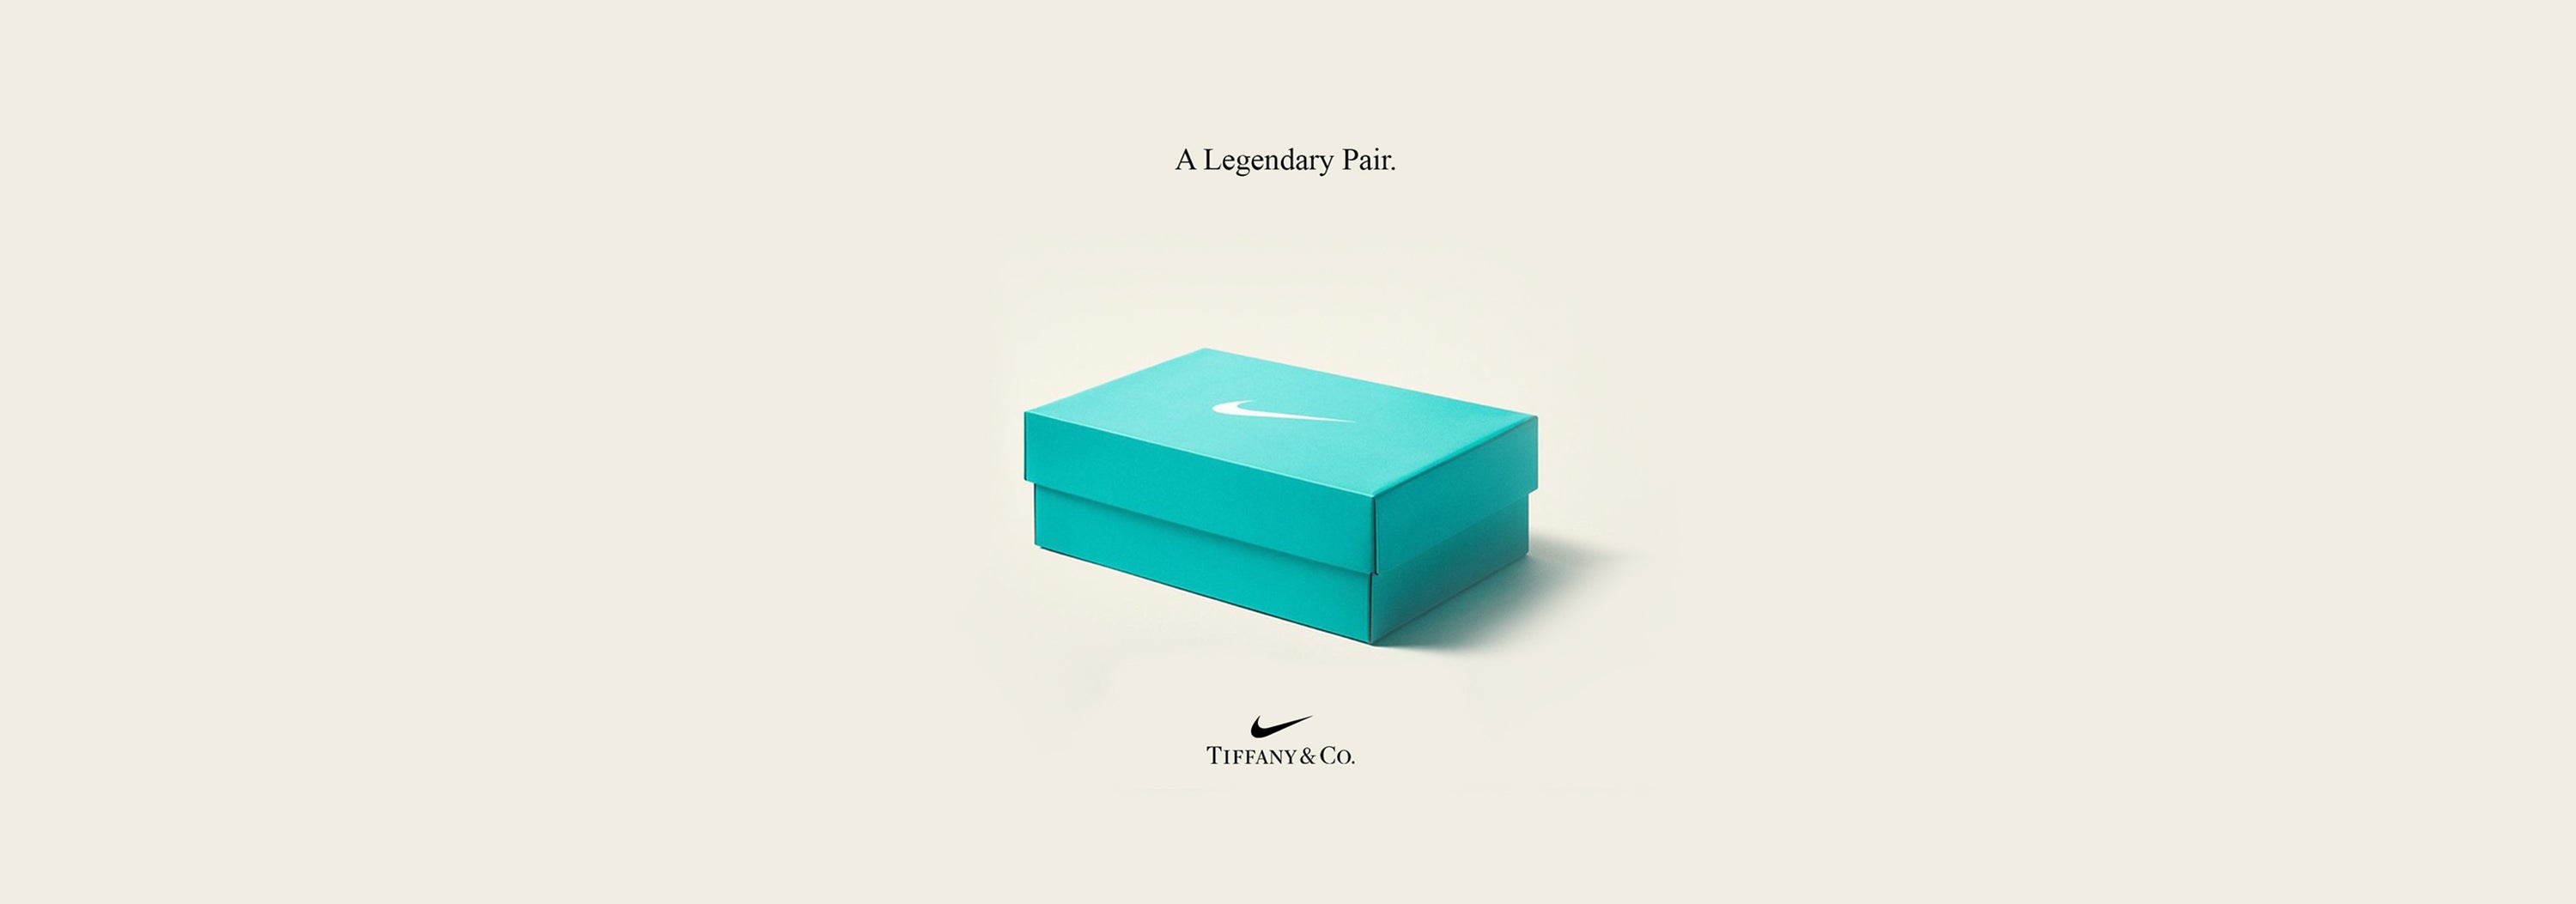 Nike Air Force 1 x Tiffany & Co. - A Match Made in Style Heaven